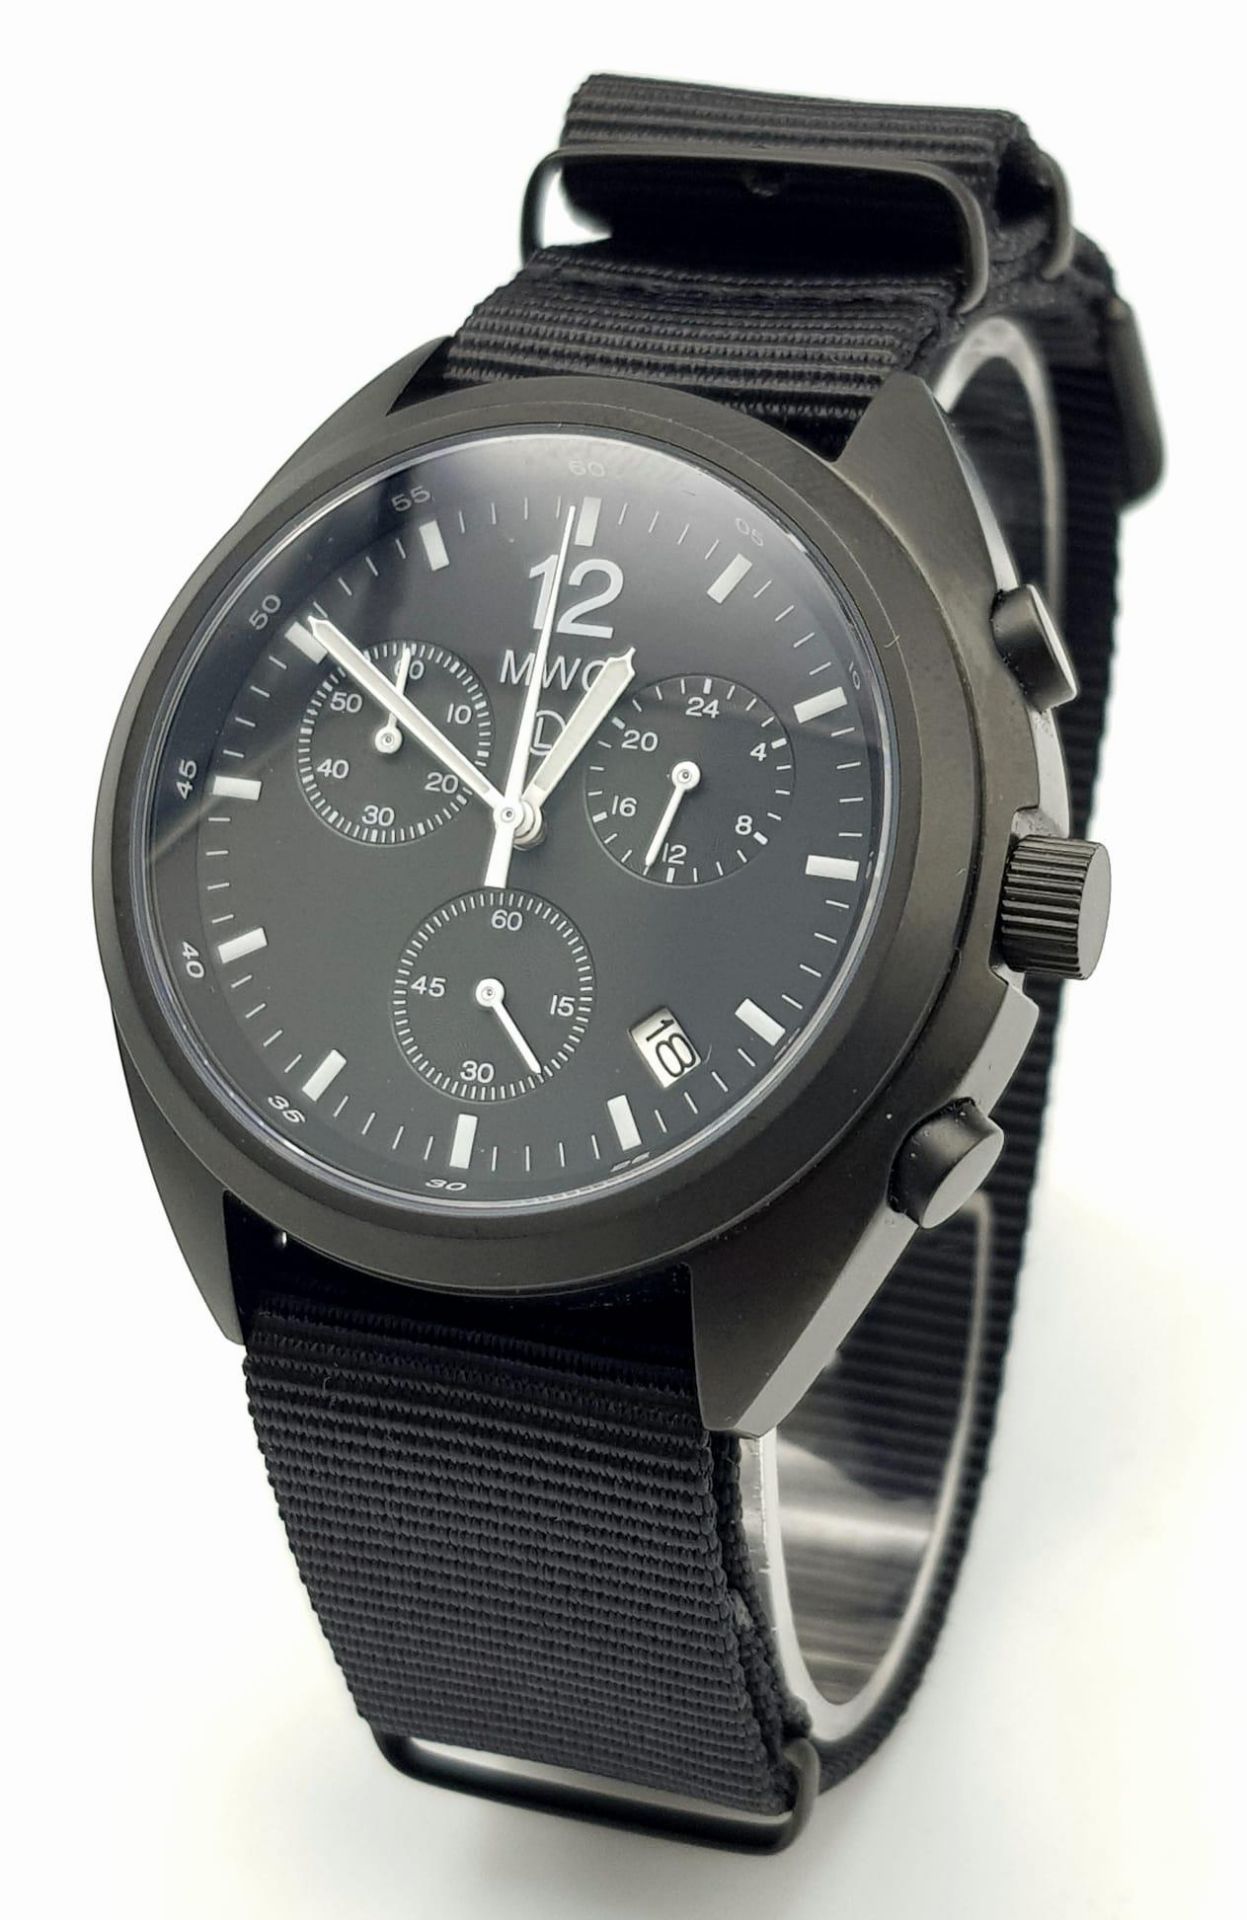 An Unworn, Full Military Specification, PVD Chronograph Watch by MWC (Military Watch Company).